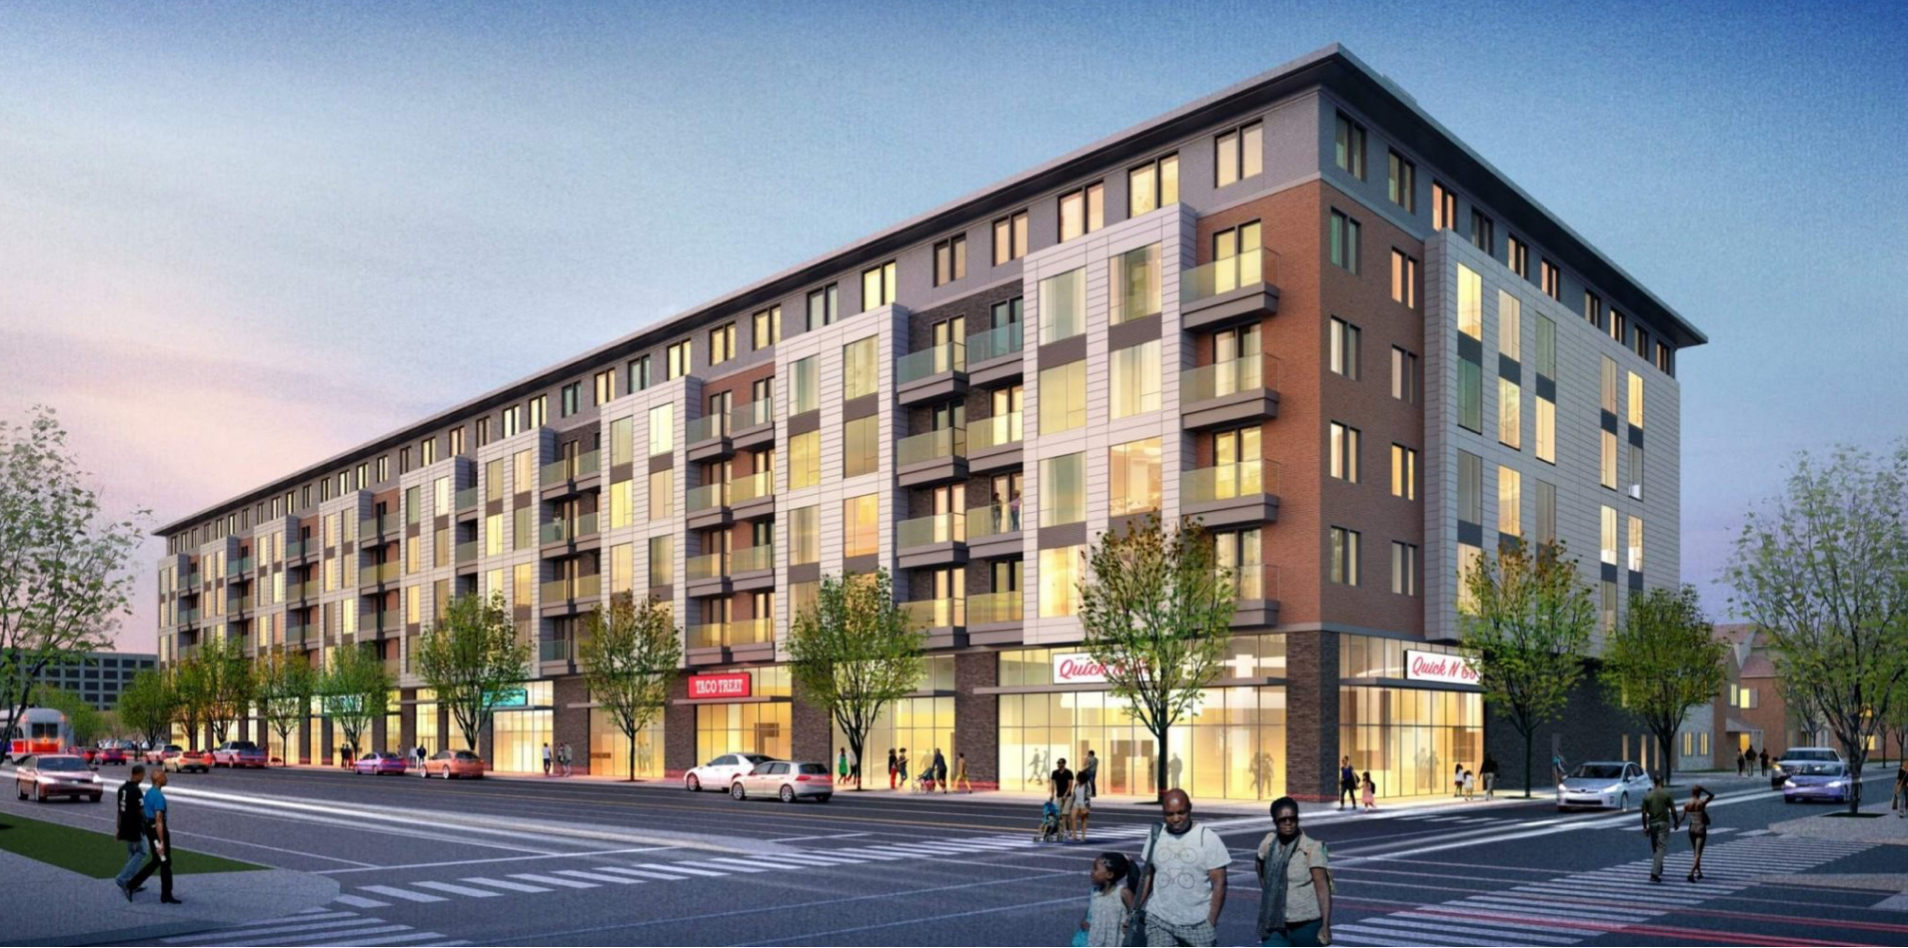 Rendering of 1030 West Girard Avenue via Civic Design Review.